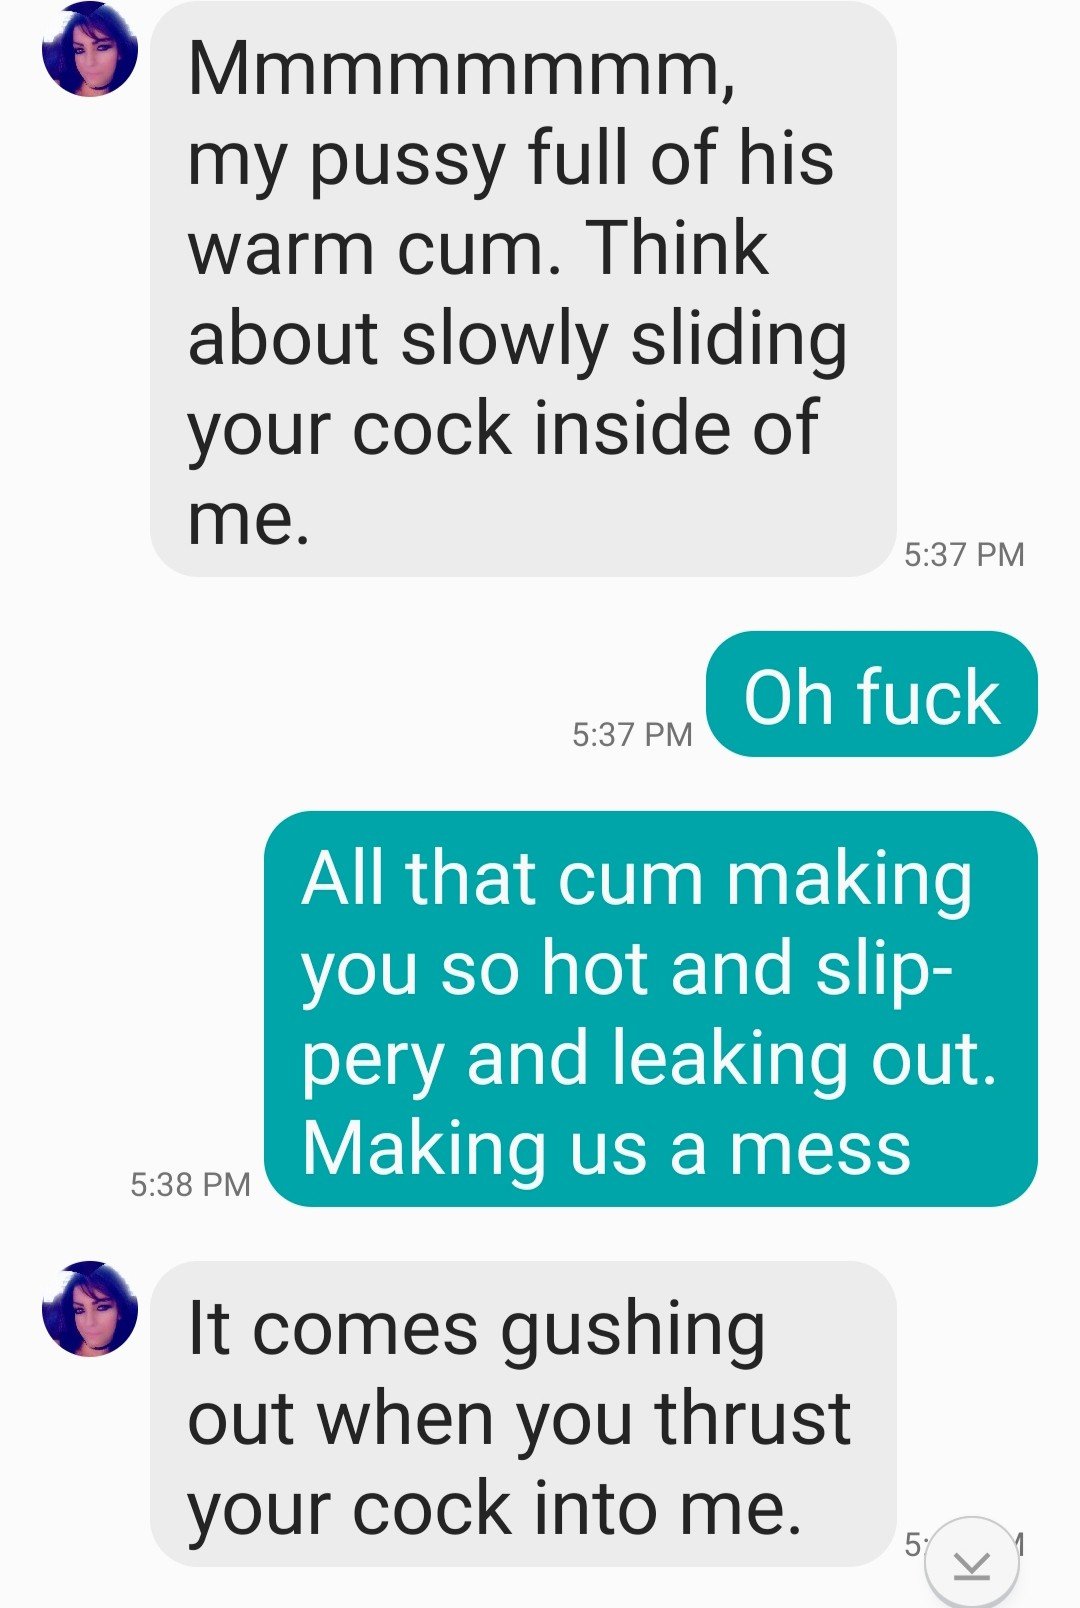 Photo by Sixfive with the username @Sixfive, who is a verified user,  September 10, 2019 at 4:20 PM. The post is about the topic Hotwife Texts and the text says 'Fuck🔥🔥🔥 going back through old texts. These texts from my sweet girl are gold!!'